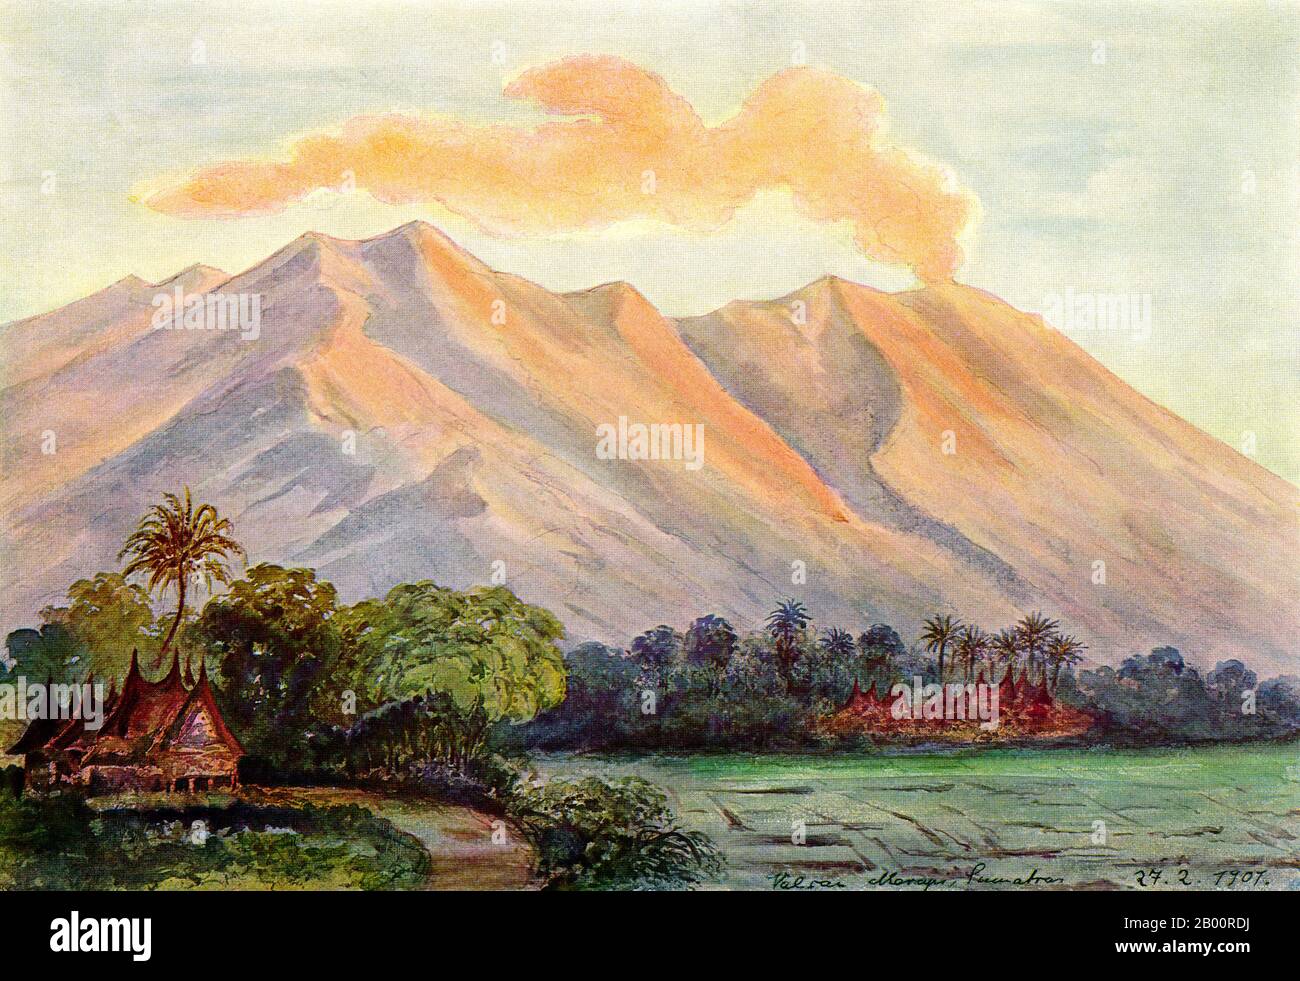 Indonesia/Germany: 'Marapi Volcano in the Padang Highlands, Sumatra'. Watercolour painting by the German scientist and traveller Ernst Haeckel (1834-1919), 1901.  Ernst Heinrich Philipp August Haeckel (February 16, 1834 – August 9, 1919), also written von Haeckel, was an eminent German biologist, naturalist, philosopher, physician, professor and artist who discovered, described and named thousands of new species, mapped a genealogical tree relating all life forms, and coined many terms in biology, including anthropogeny, ecology, phylum, phylogeny, and the kingdom Protista. Stock Photo